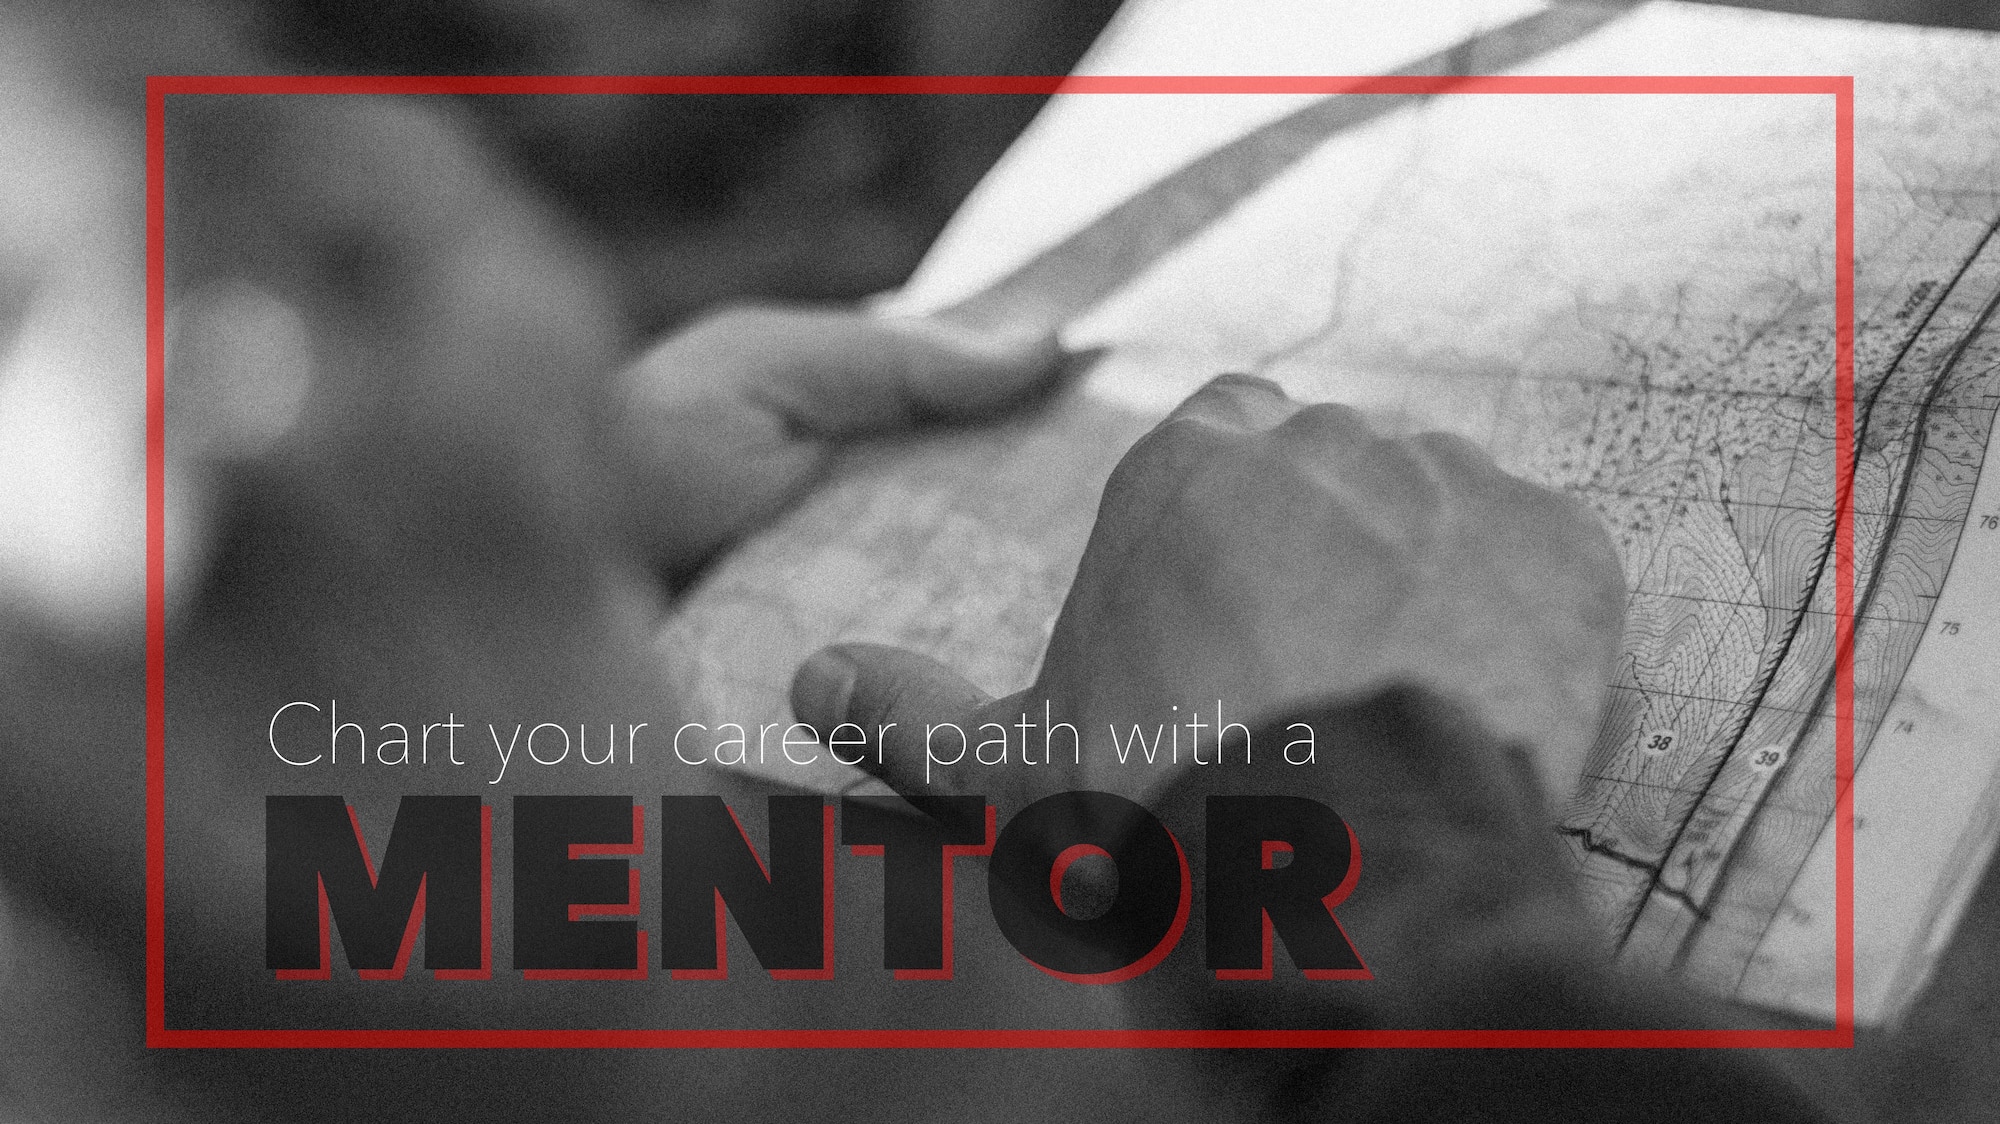 This graphic depicts a pilot using a map to find his way as a metaphor for the relationship between a mentor and mentee.